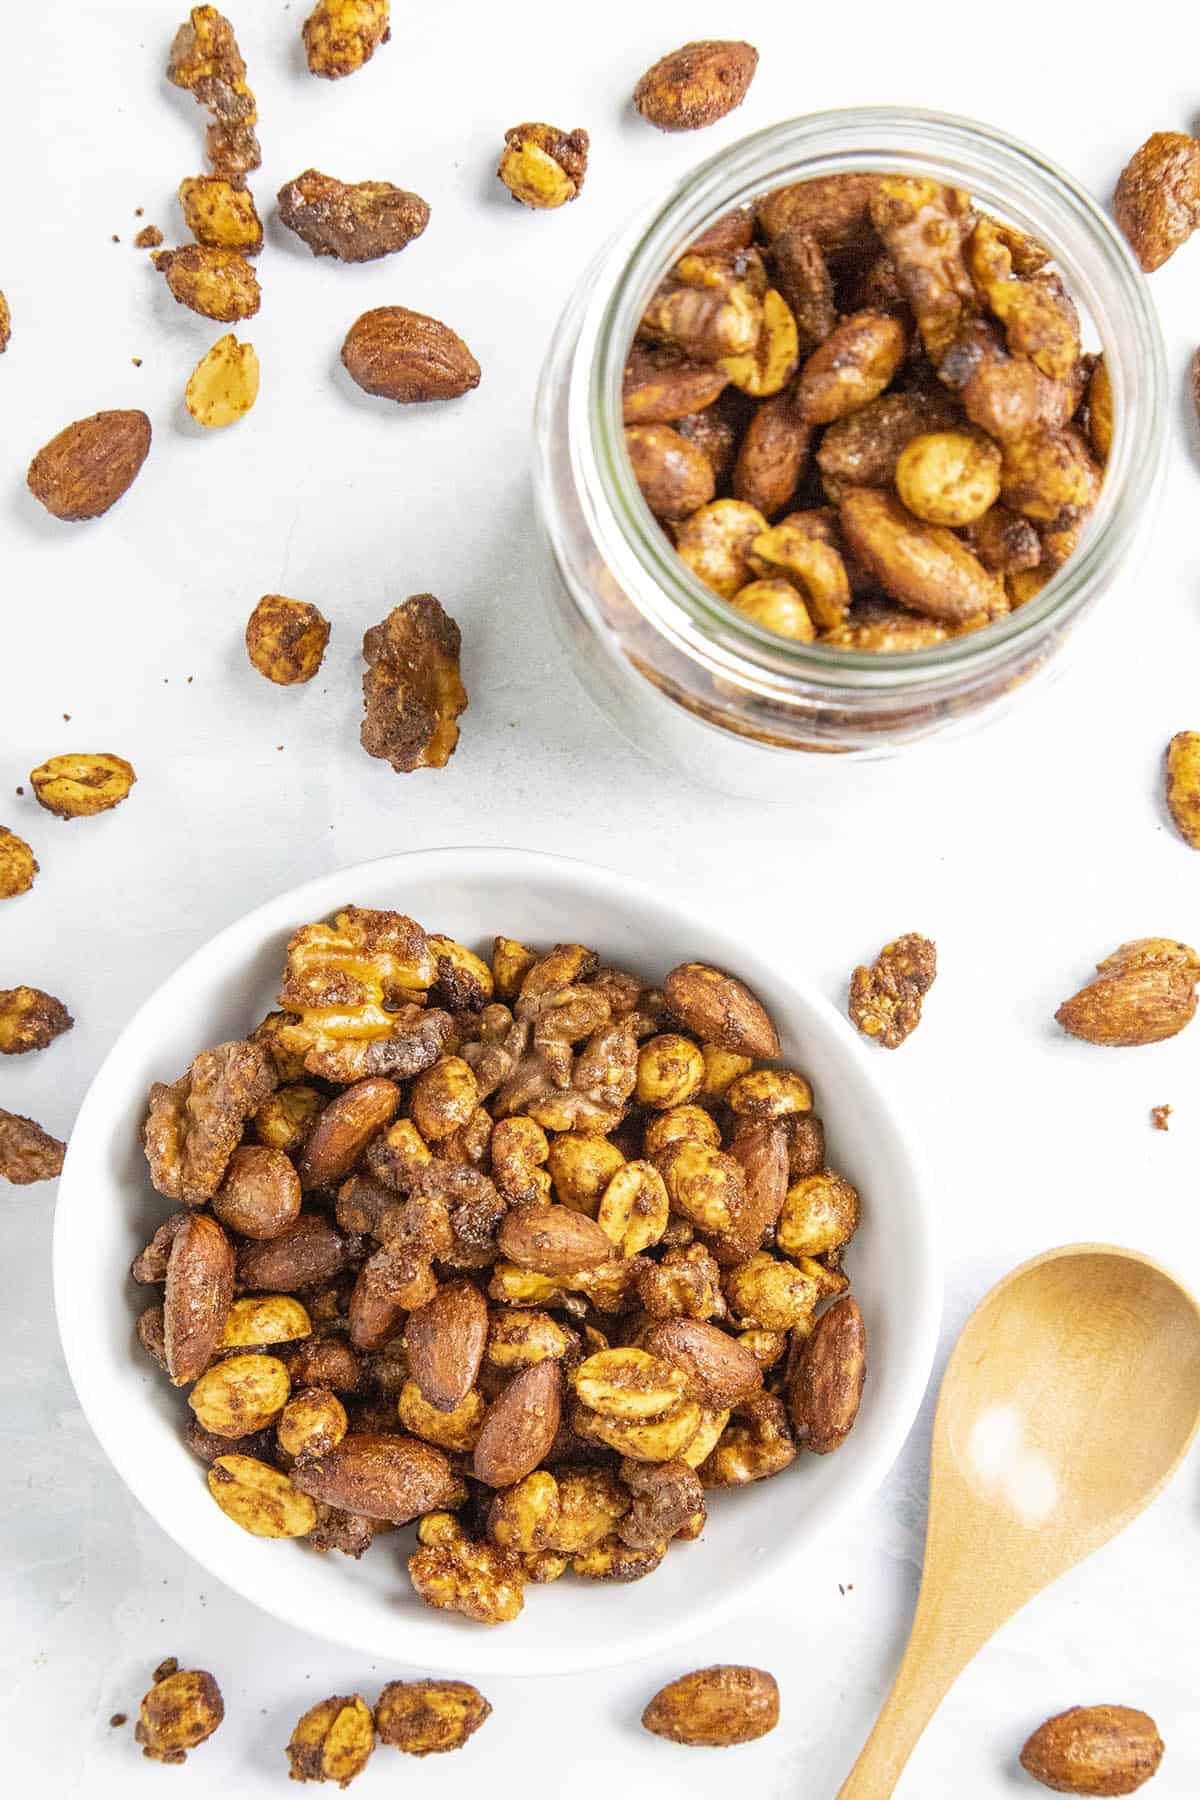 Spiced Nuts in a bowl and a jar